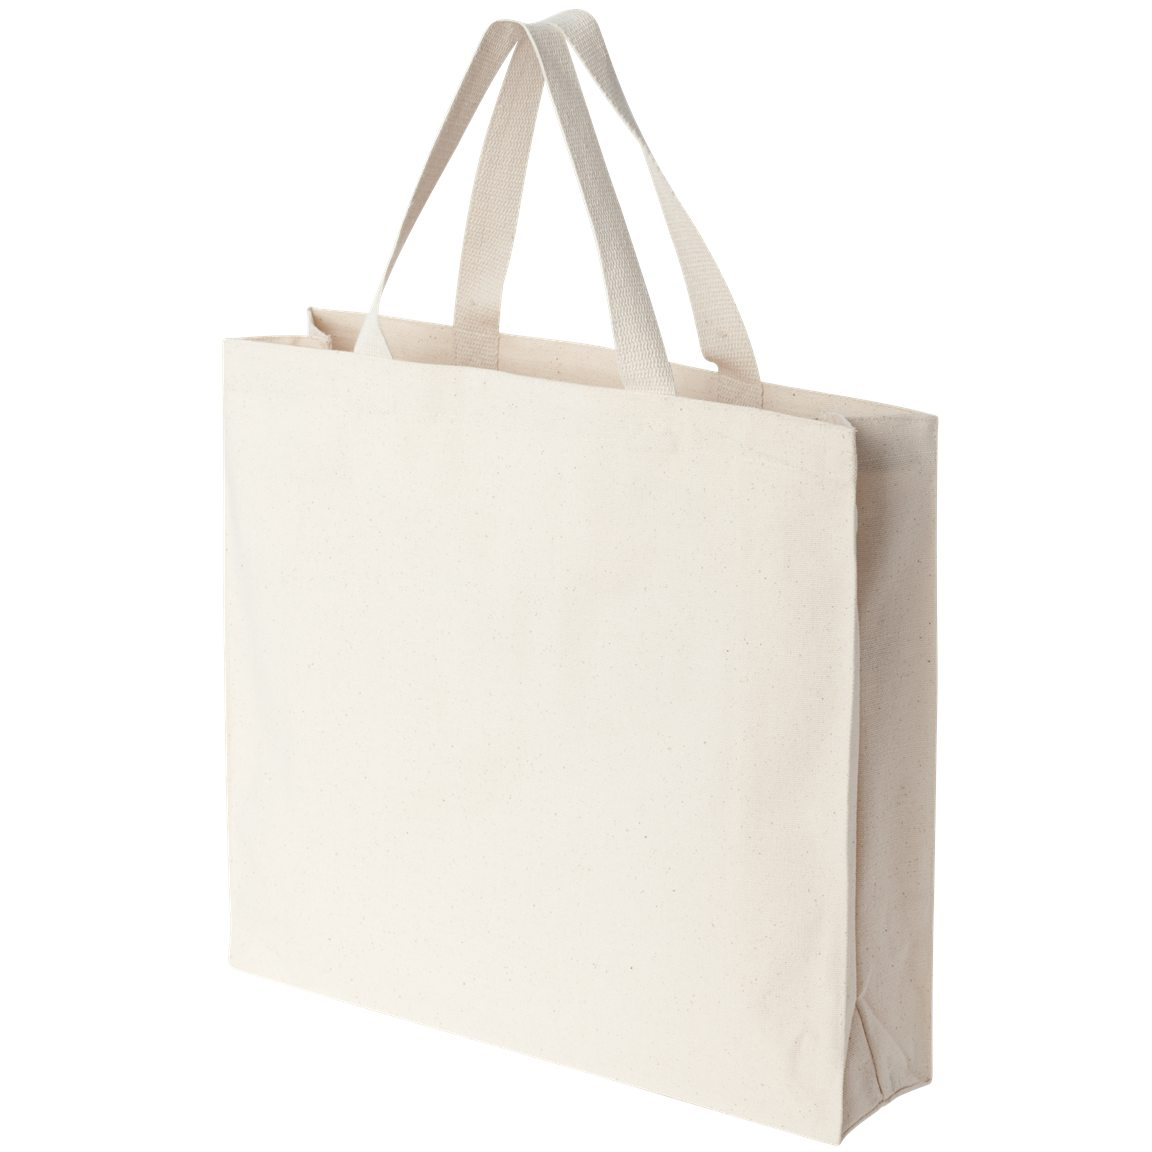 Liberty Bags 8501 12 Ounce Gusseted Canvas Tote - Natural | FullSource.com